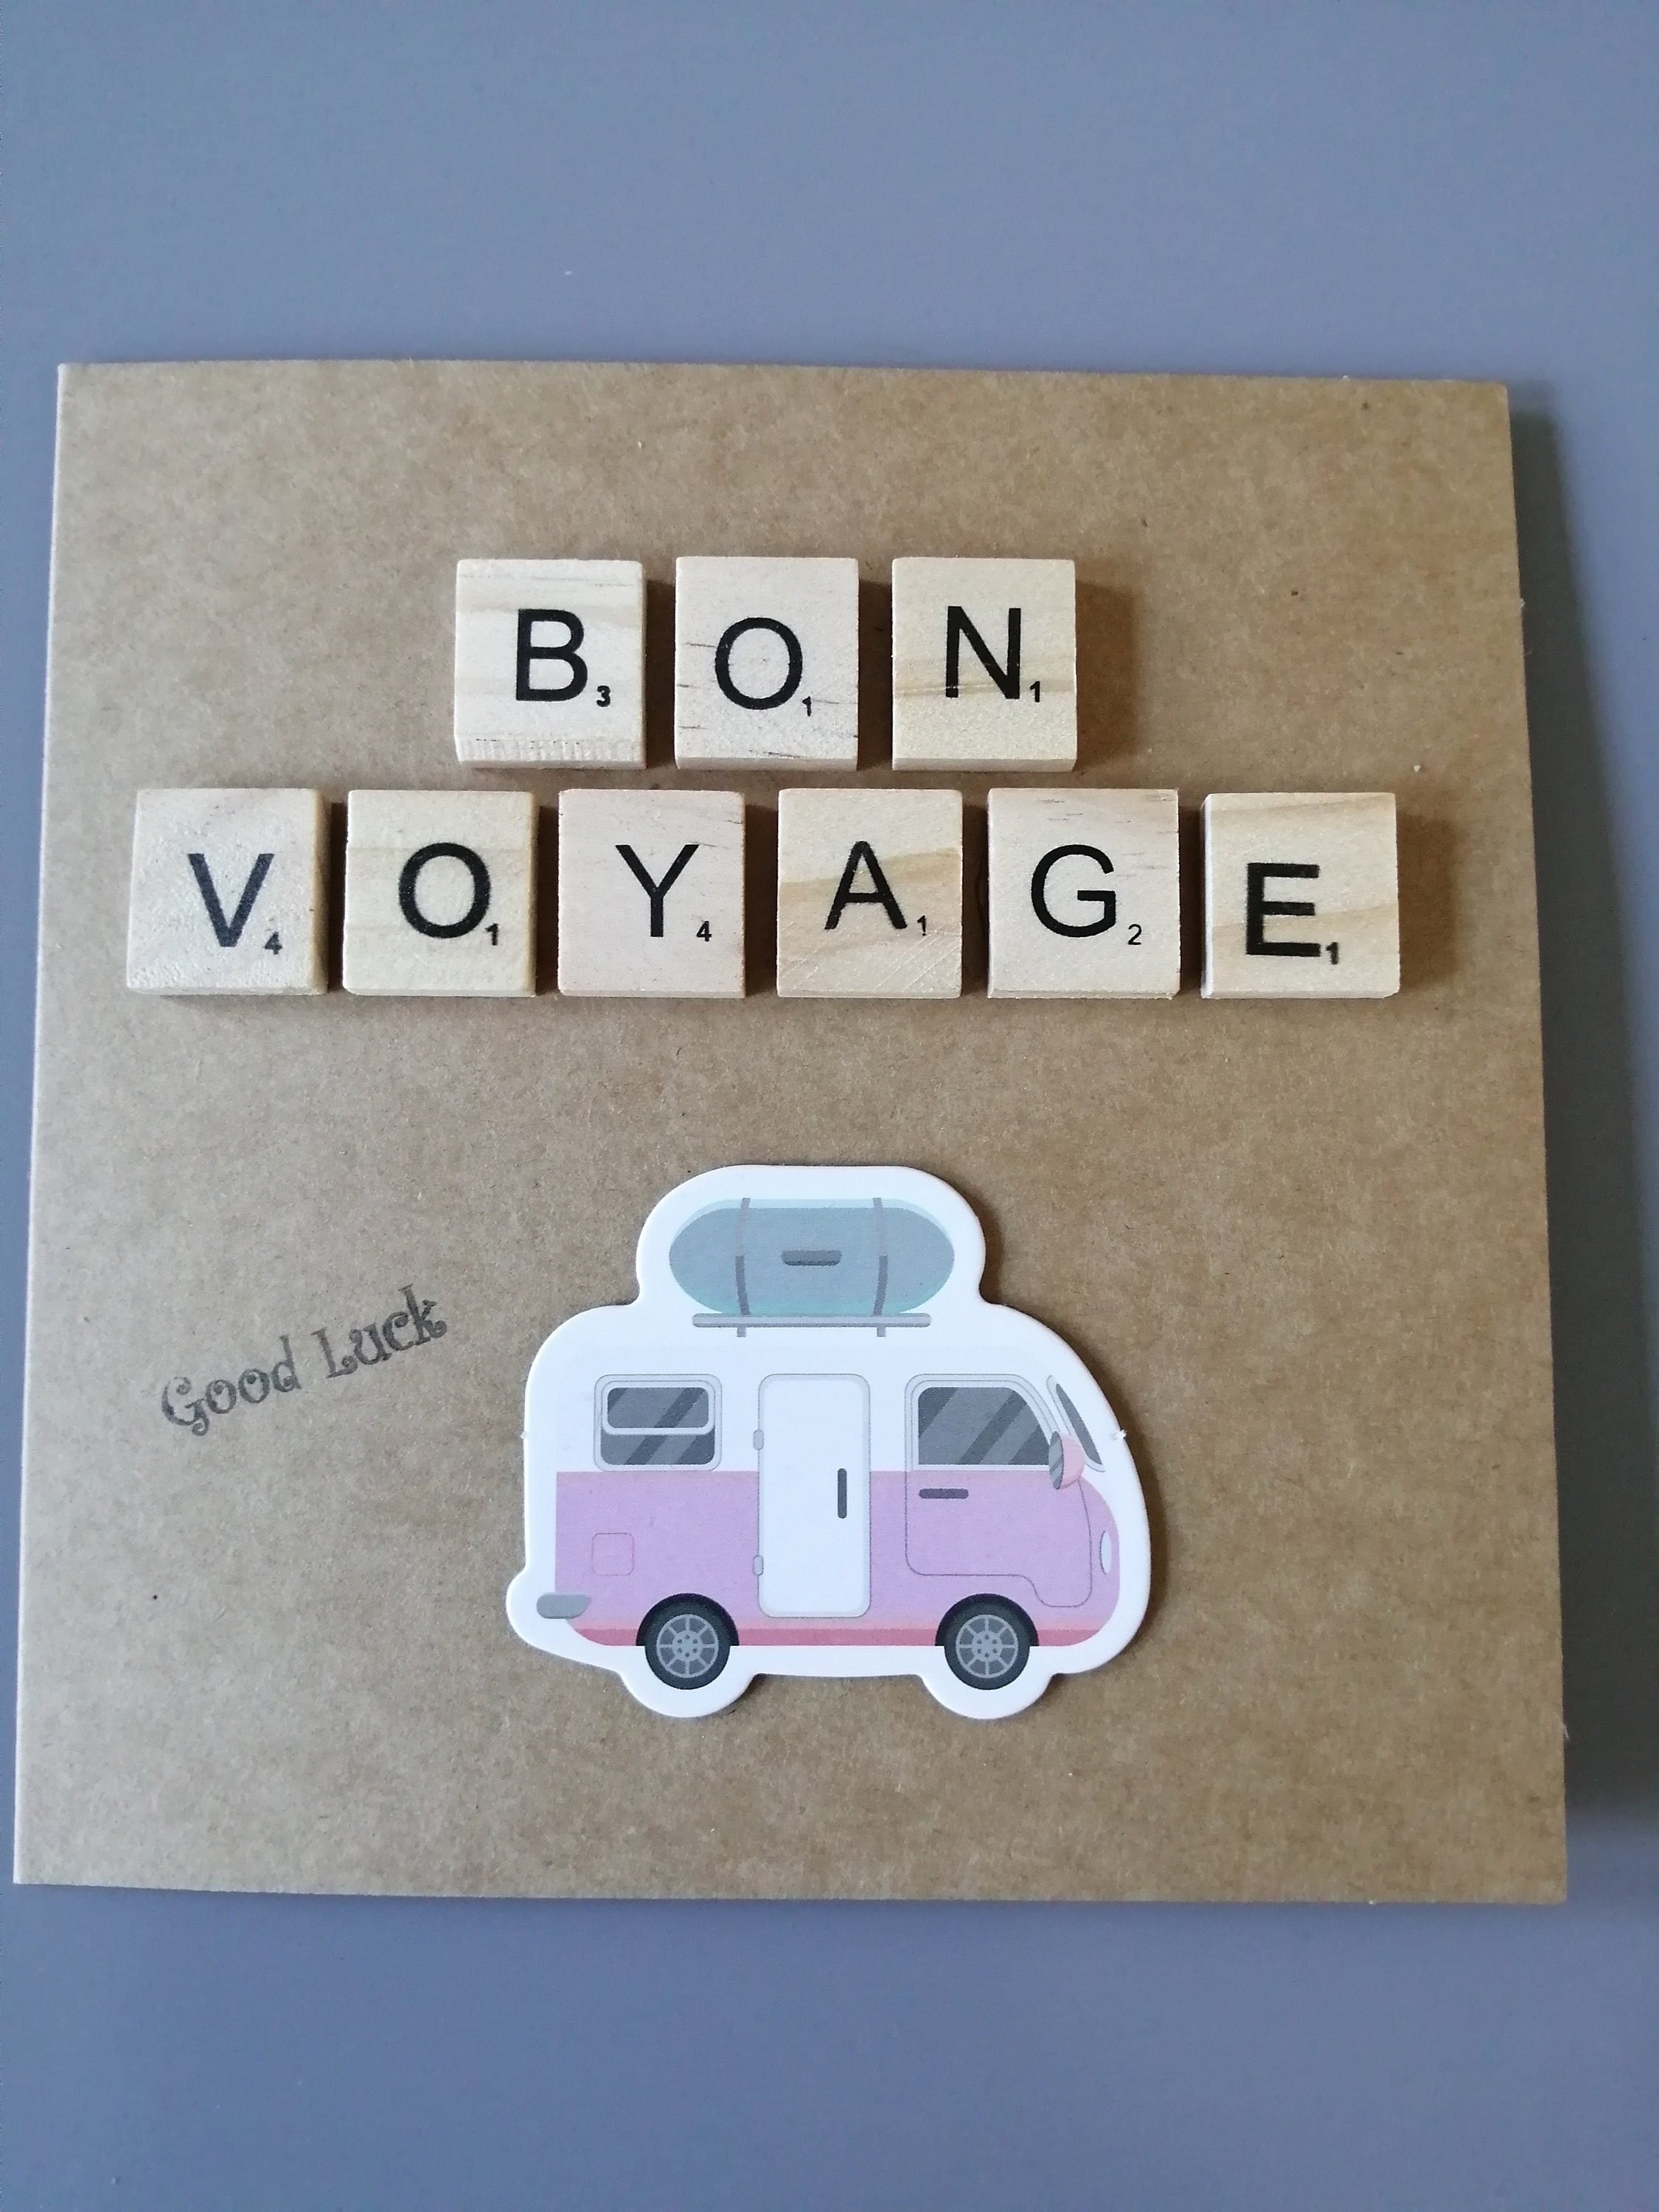 voyage meaning scrabble